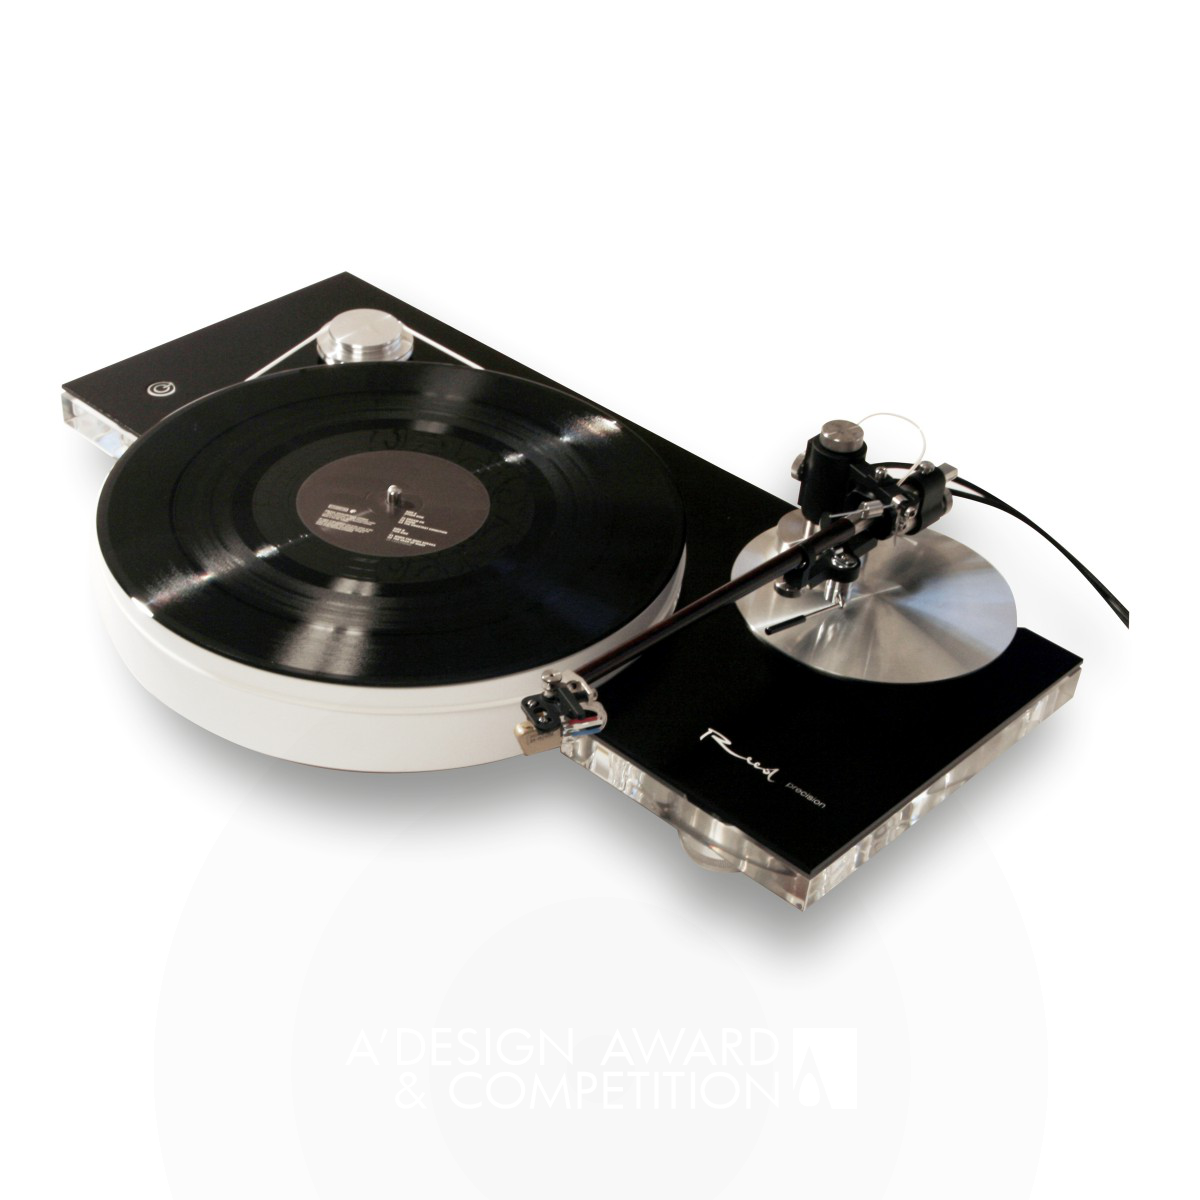 Reed precision <b>turntable